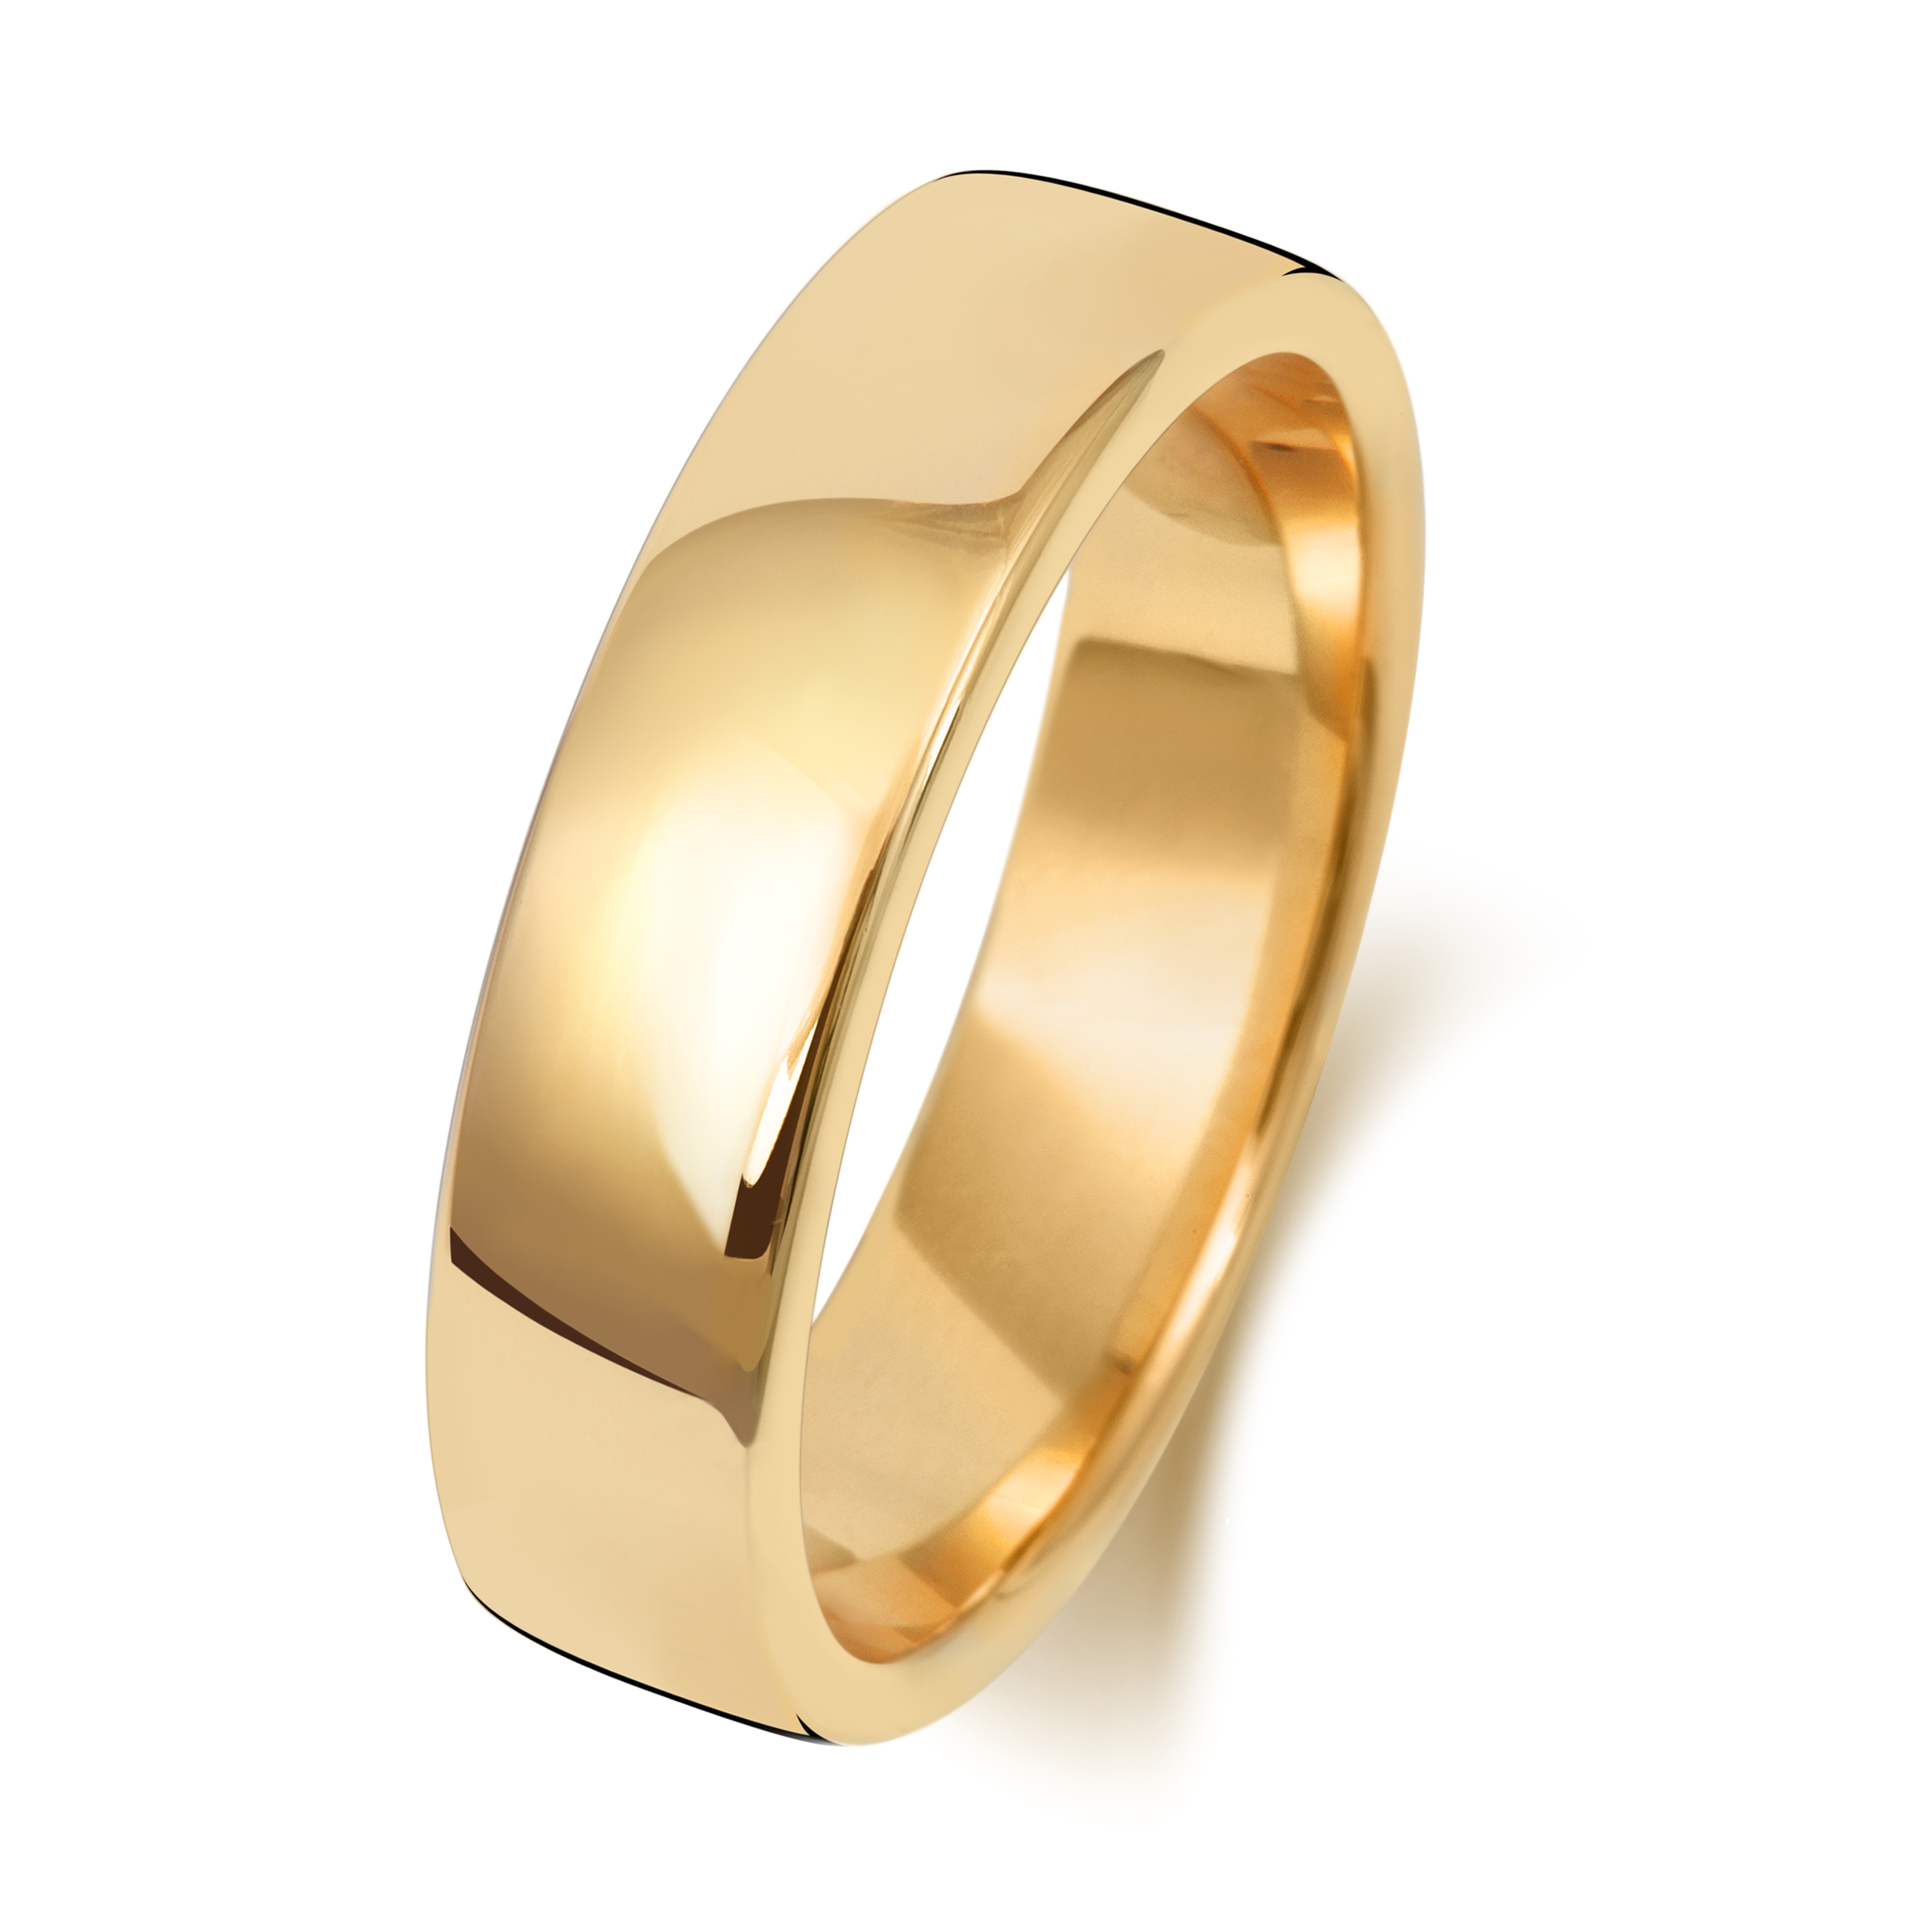 2.5 Solid 18ct Carat Gold 2 5 6 3 7mm Soft Court Wedding Band/Ring 4 